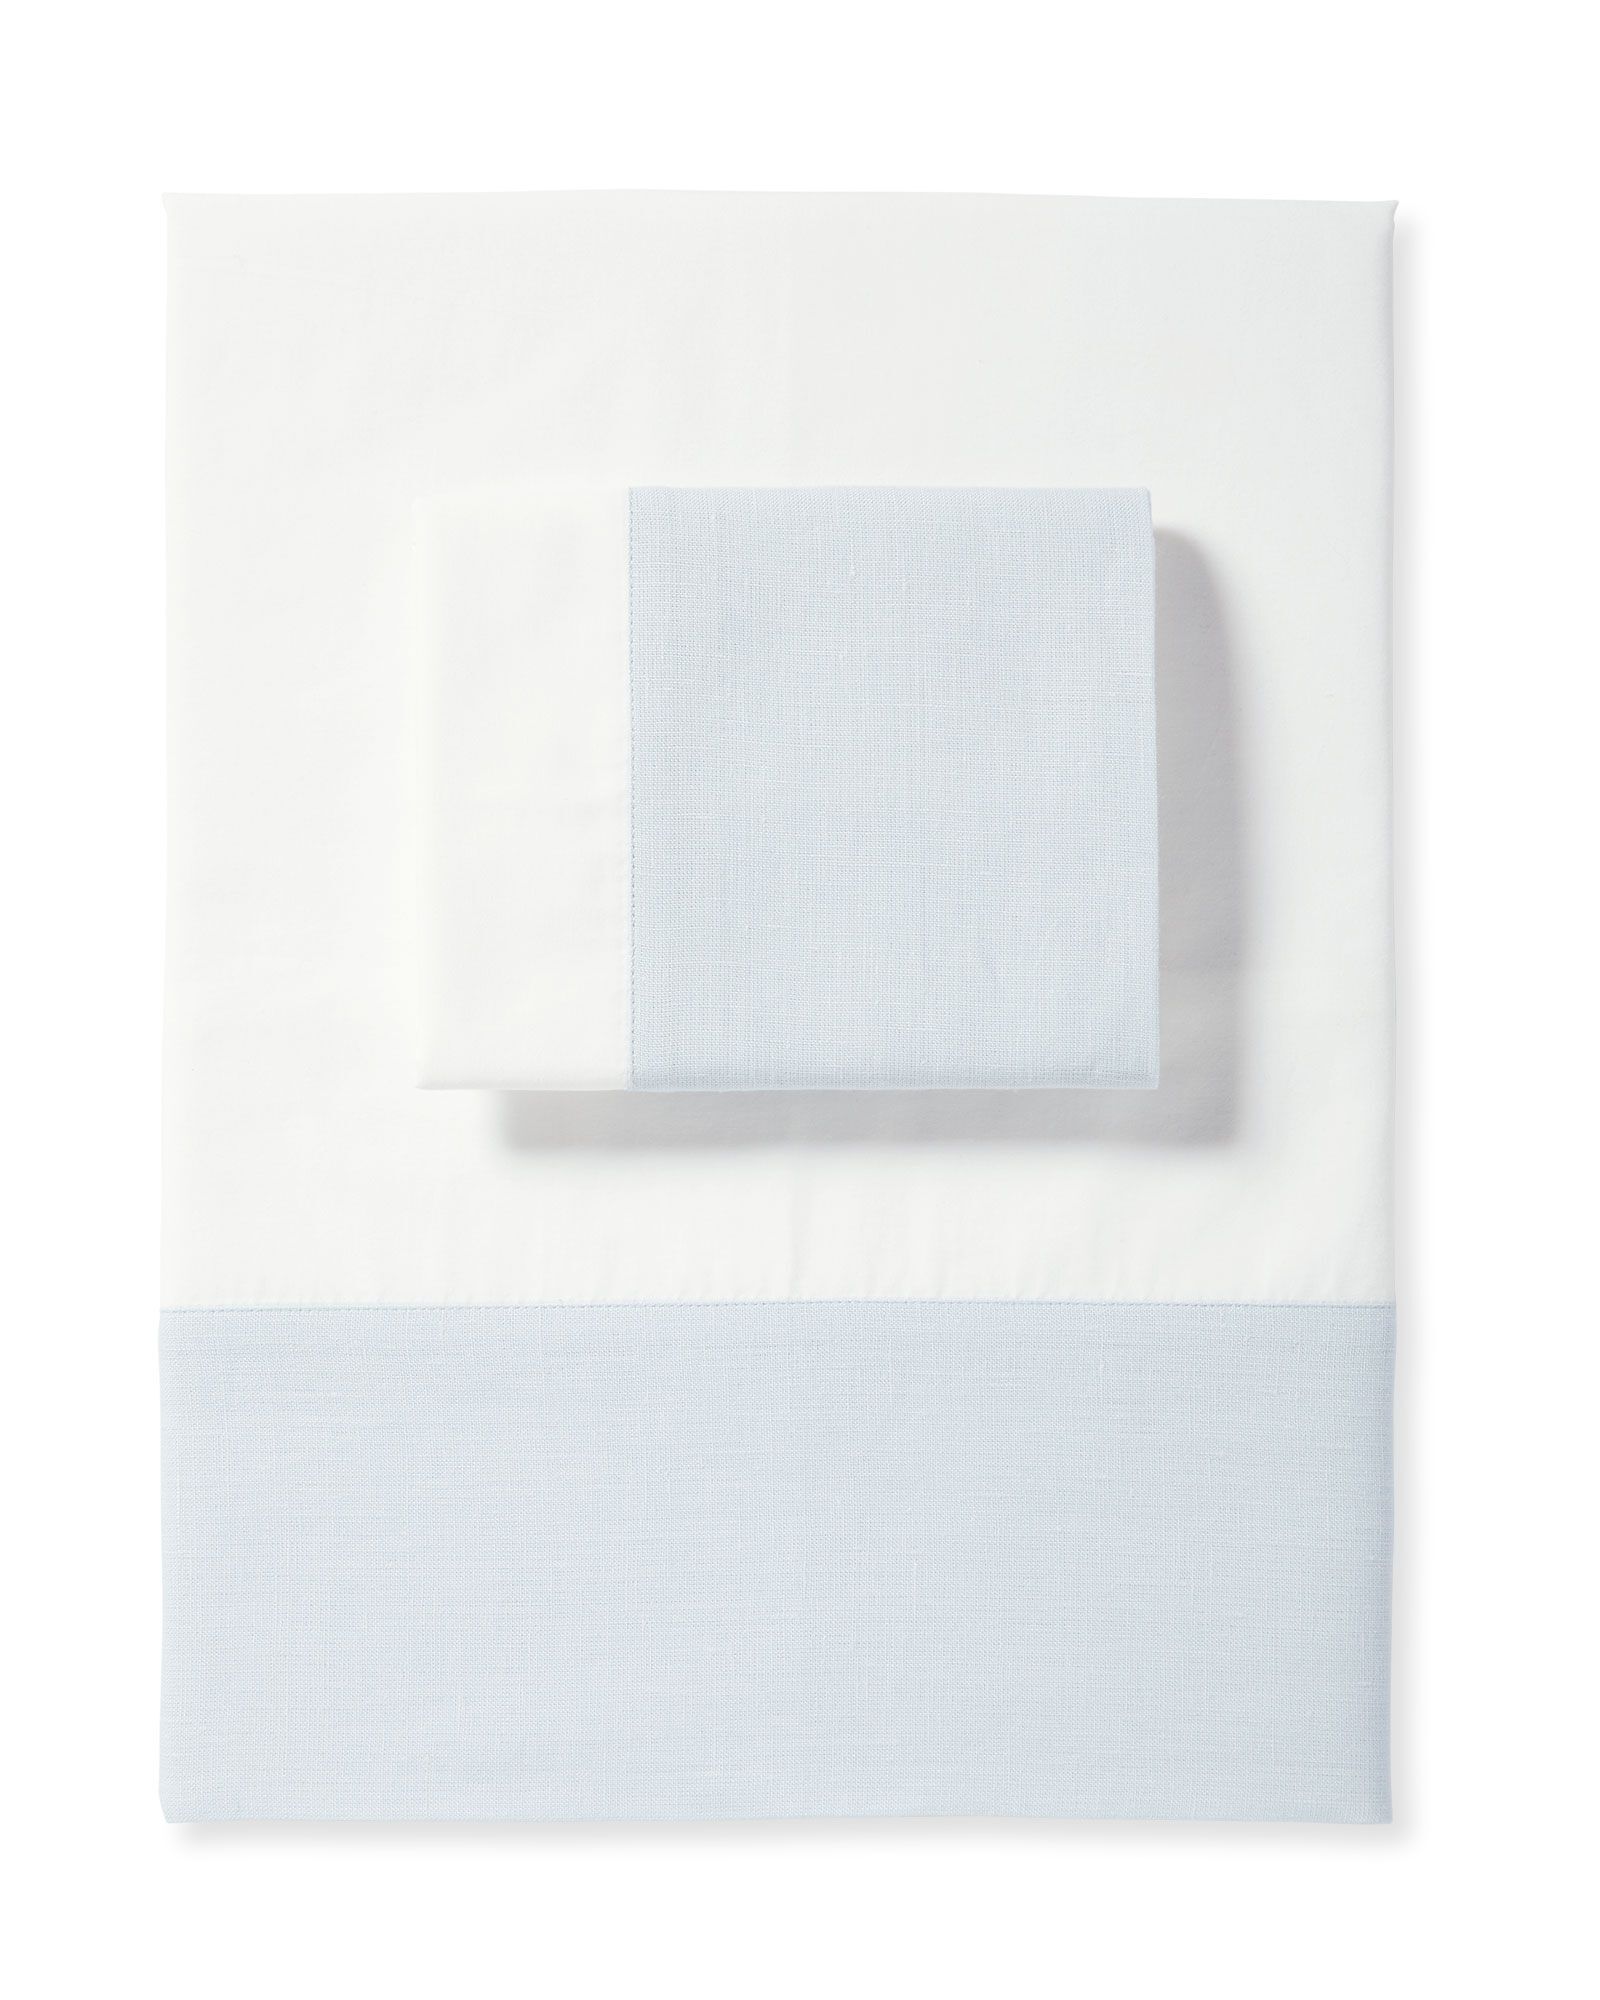 Salento Percale Sheet Set | Serena and Lily